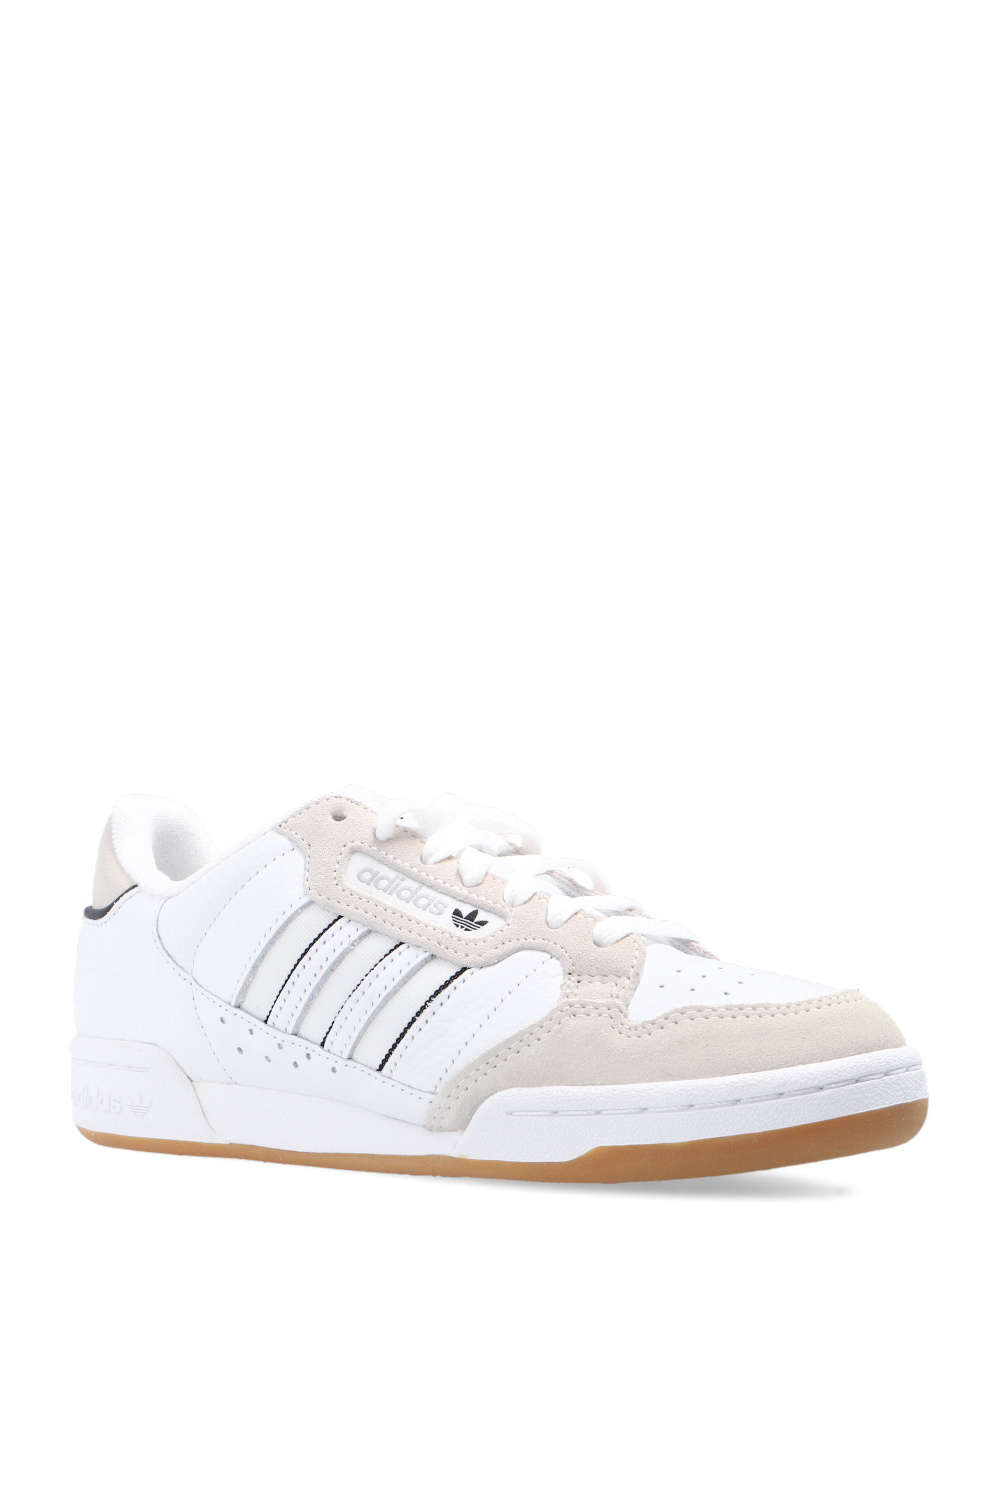 champion x adidas nmd boost xr_1 white | IetpShops | Women\'s Shoes | ADIDAS  Originals \'Continental 80 Stripes\' sneakers